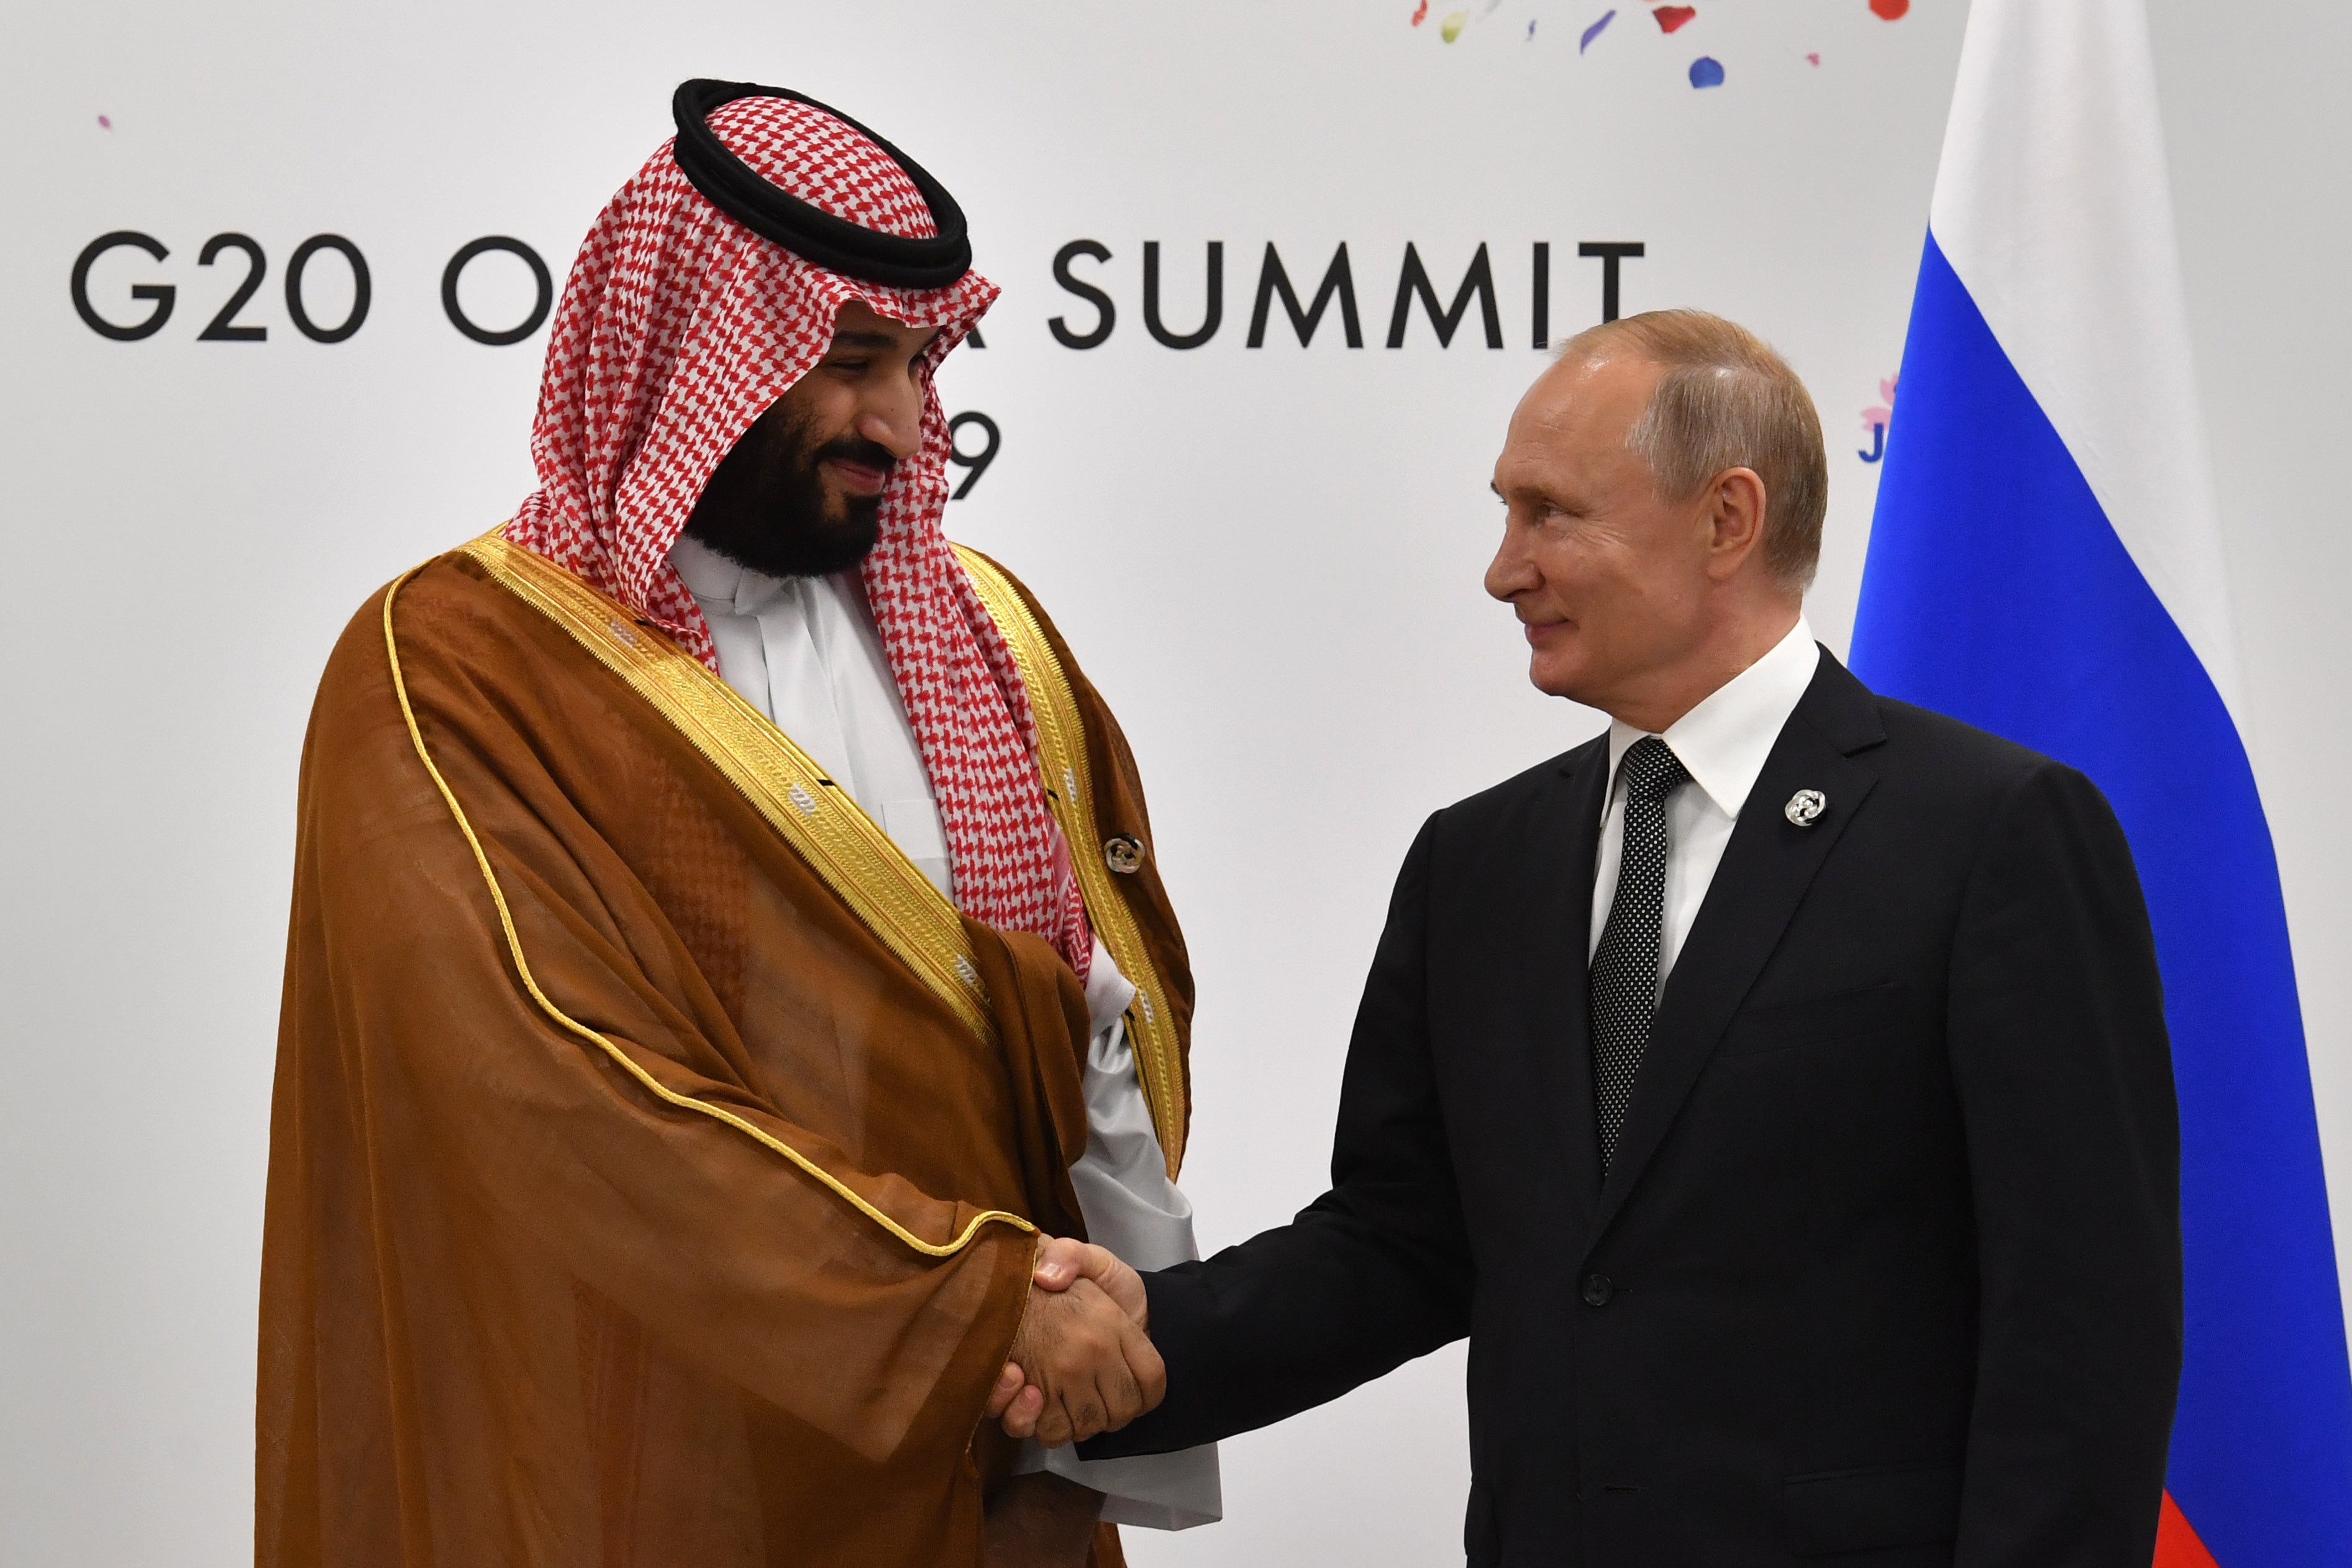 Russian president Vladimir Putin (R) shakes hands with Saudi Arabia’s Crown Prince Mohammed bin Salman during a meeting on the sidelines of the G20 summit in Osaka, 29 June 2019